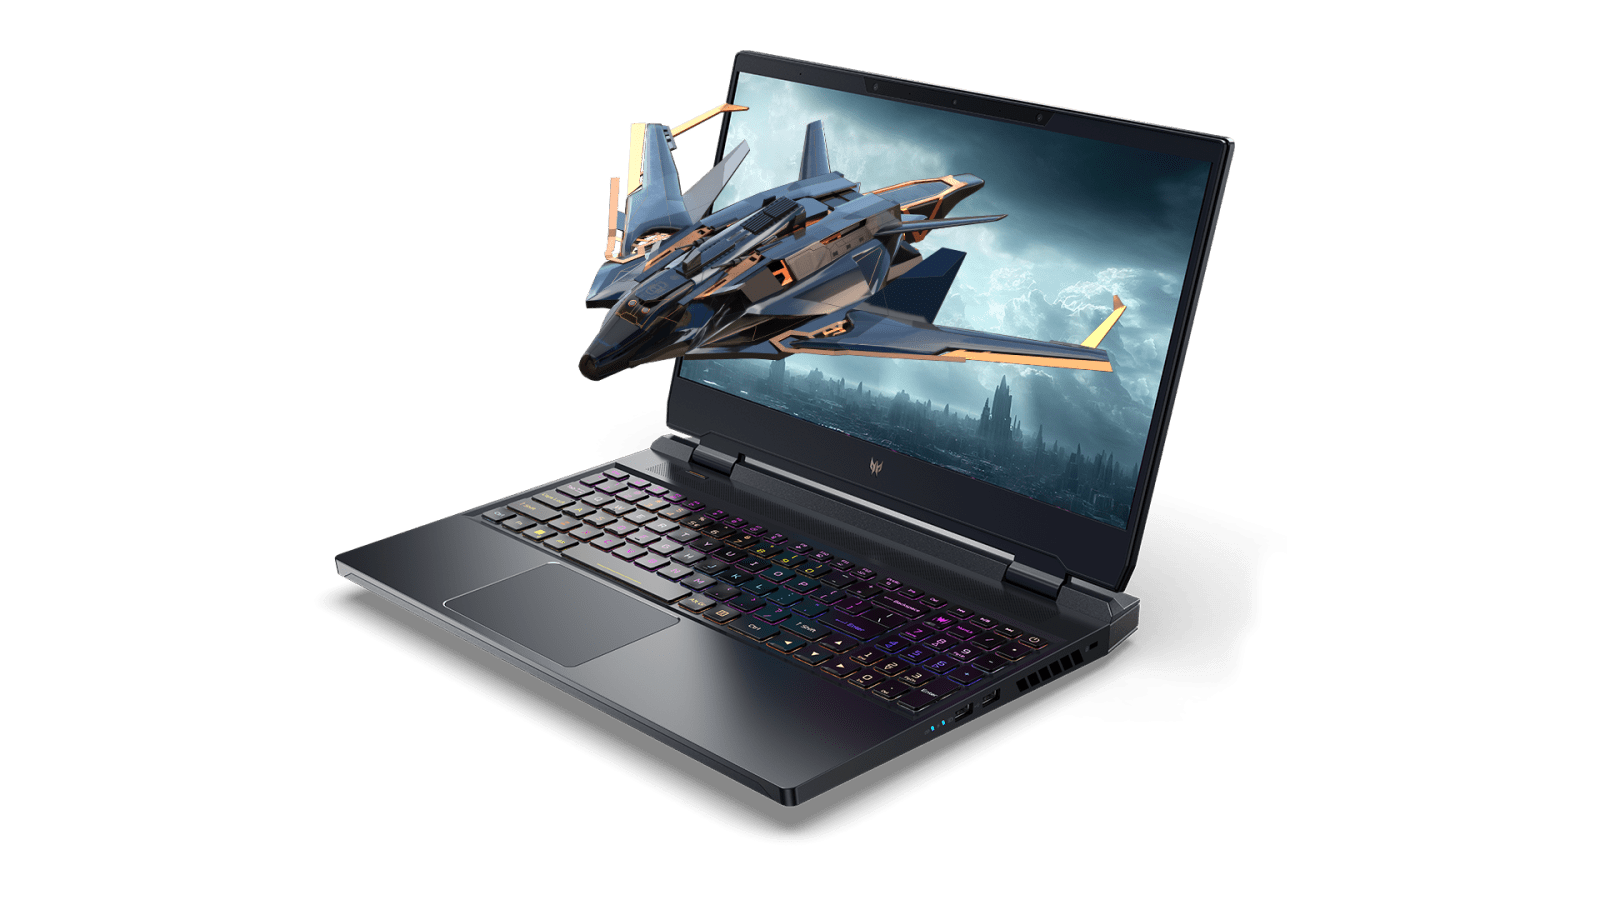 Acer introduces the new Predator Triton 17 X and Predator Helios Neo 16 high-performance gaming laptops